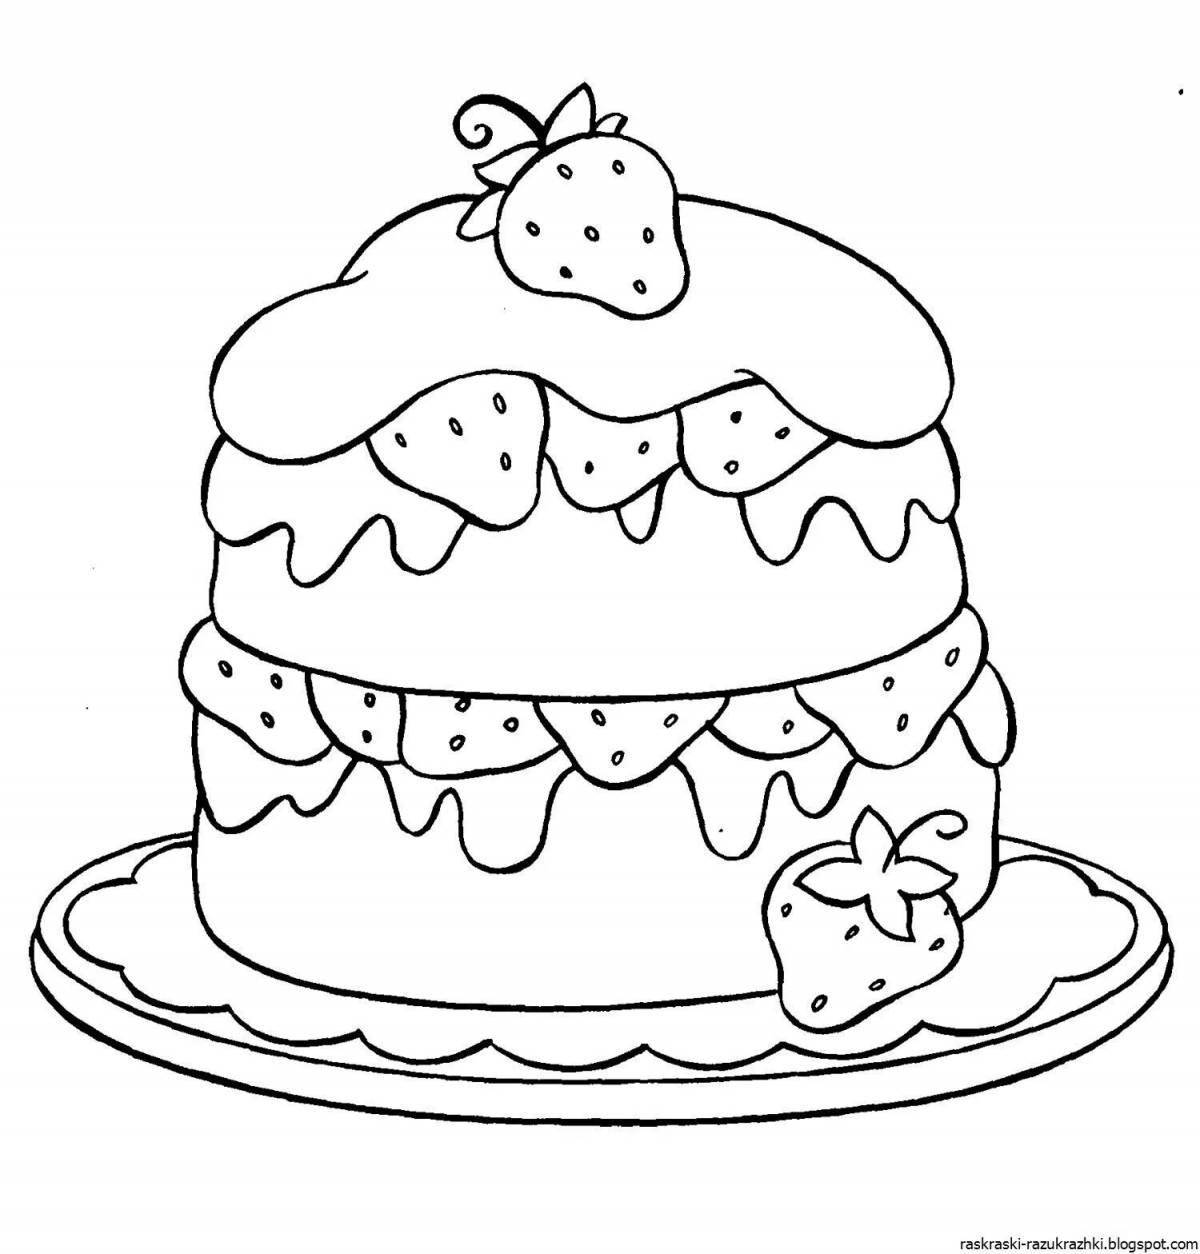 Sweet cake coloring page for kids